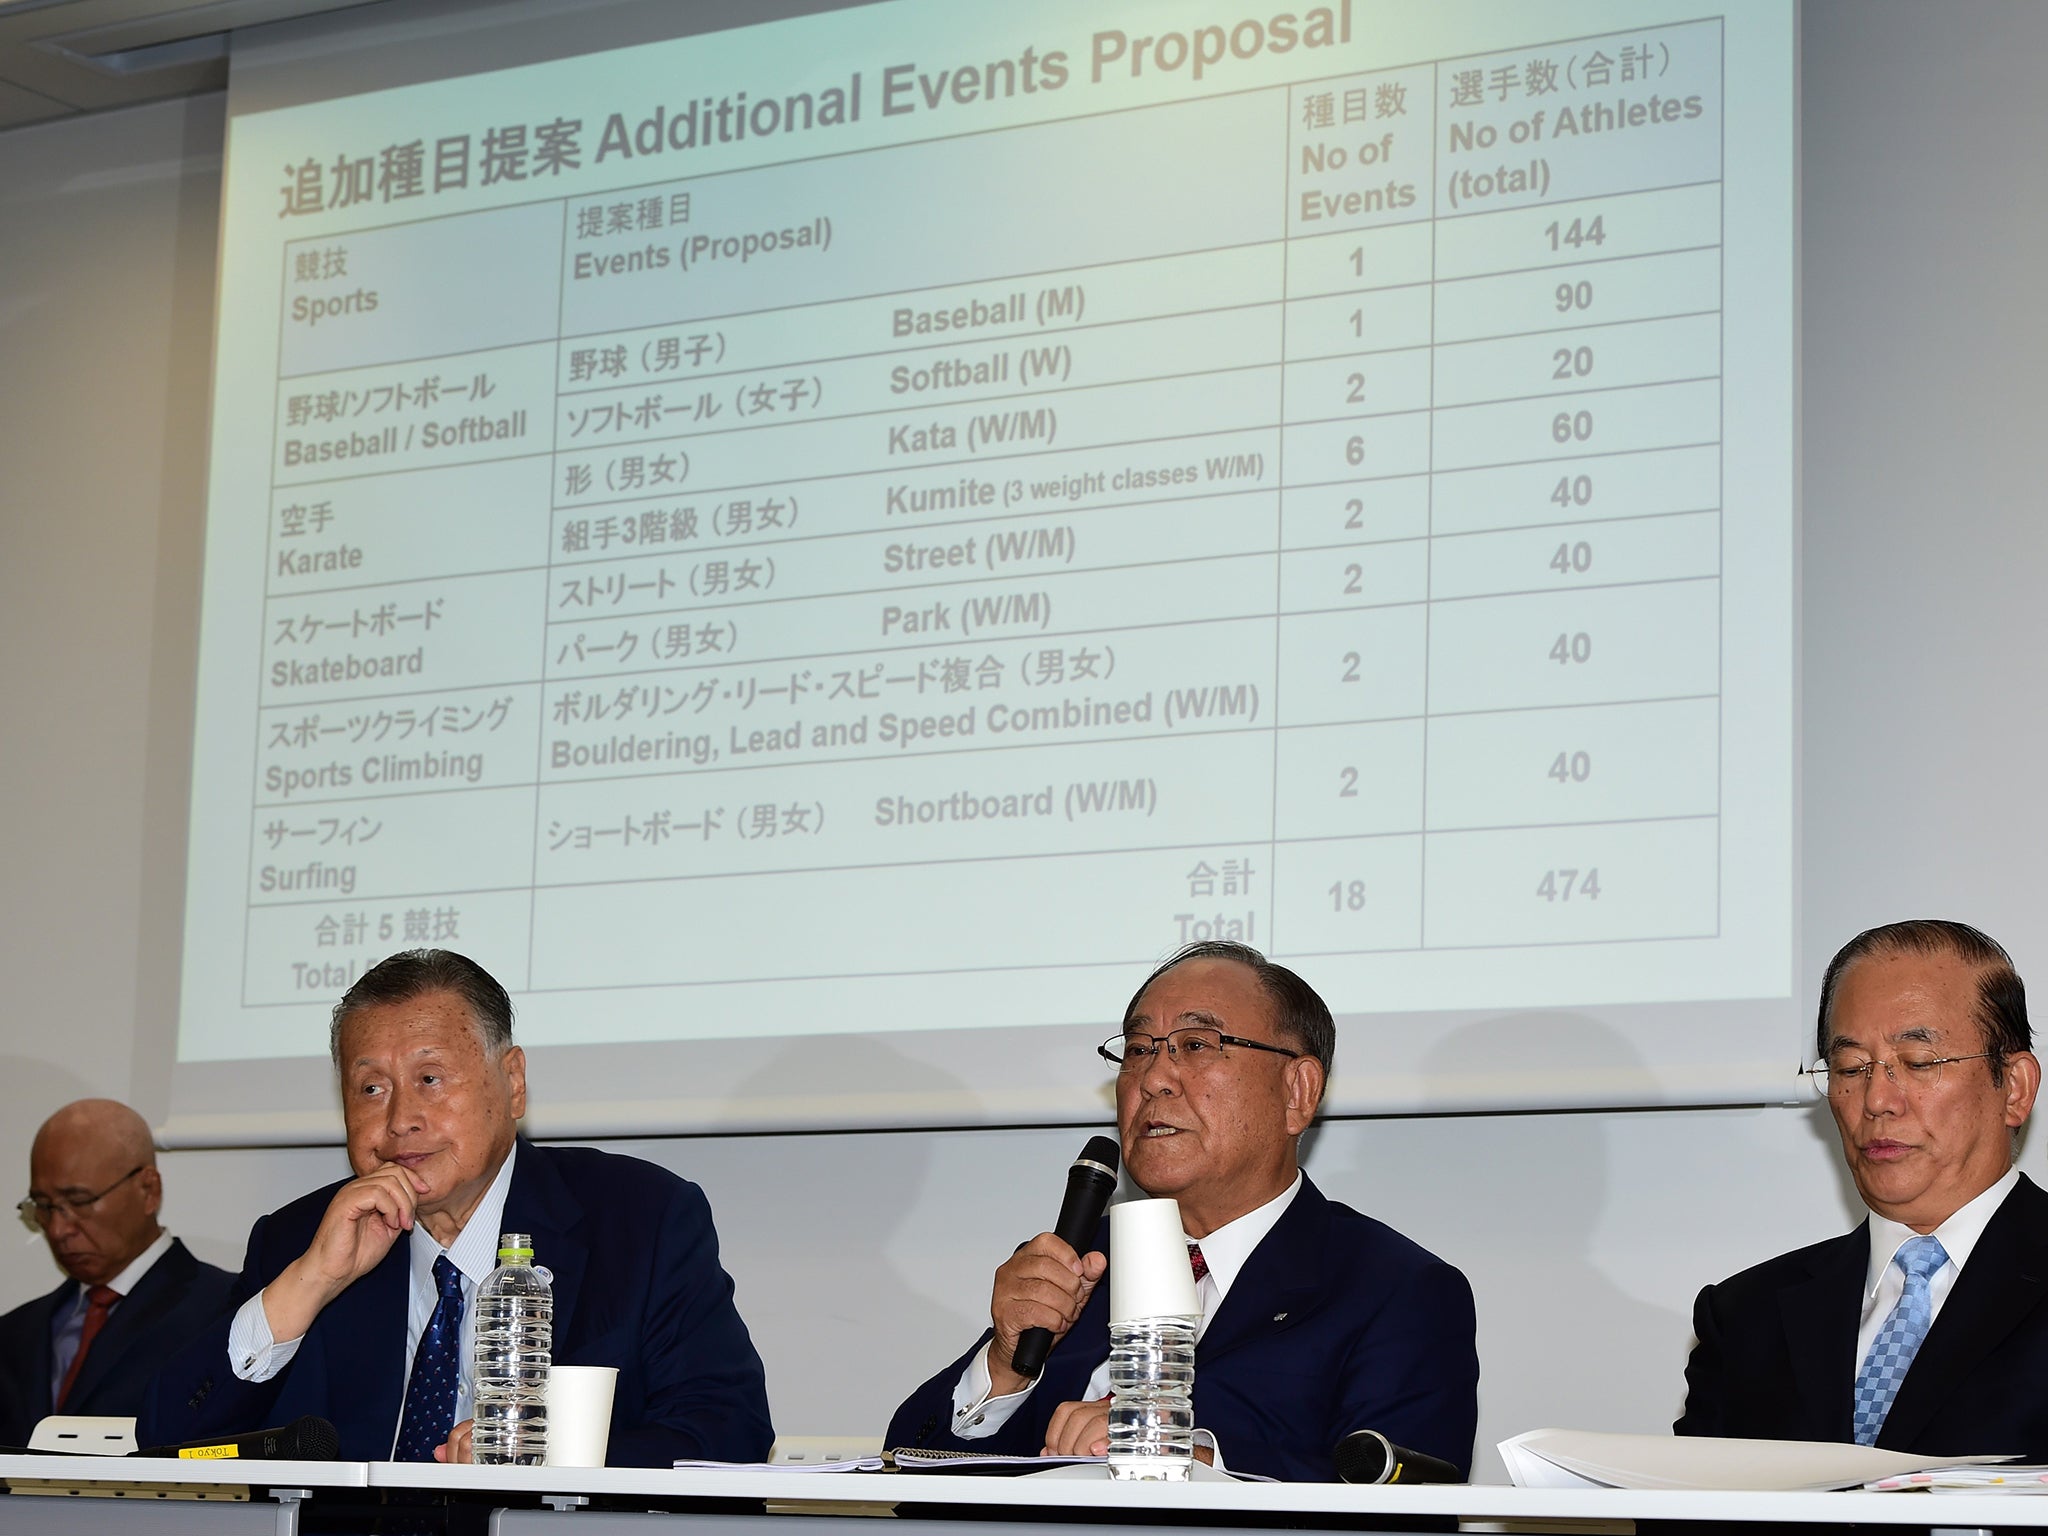 Skateboarding is one of five sports added to the 2020 Olympics, announced here by Fujio Mitarai (centre), chairman for the Tokyo 2020 additional event programme panel, and Yoshiro Mori (left), head of the organising committee